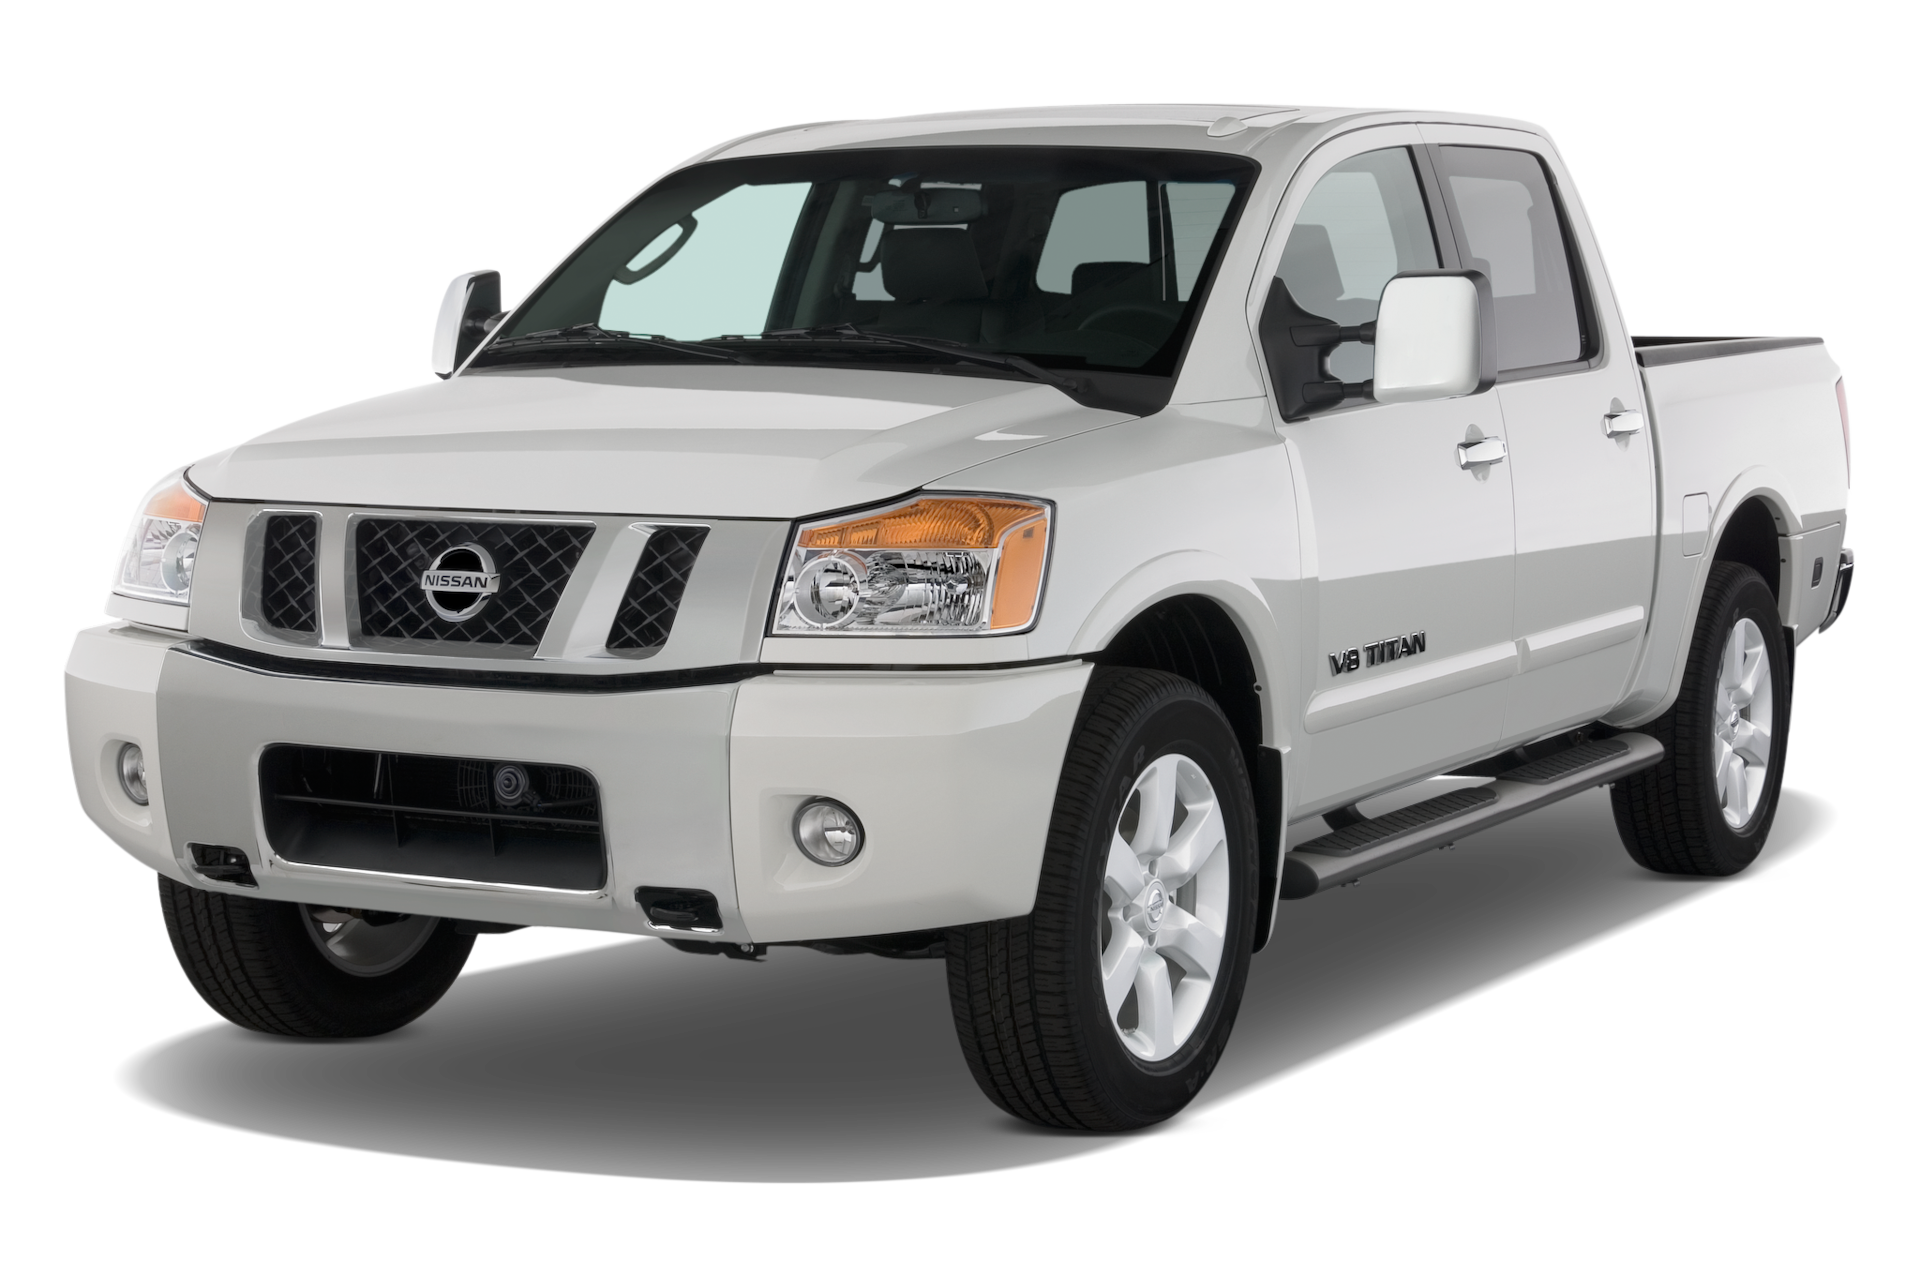 2010 Nissan Titan Prices, Reviews, and Photos - MotorTrend